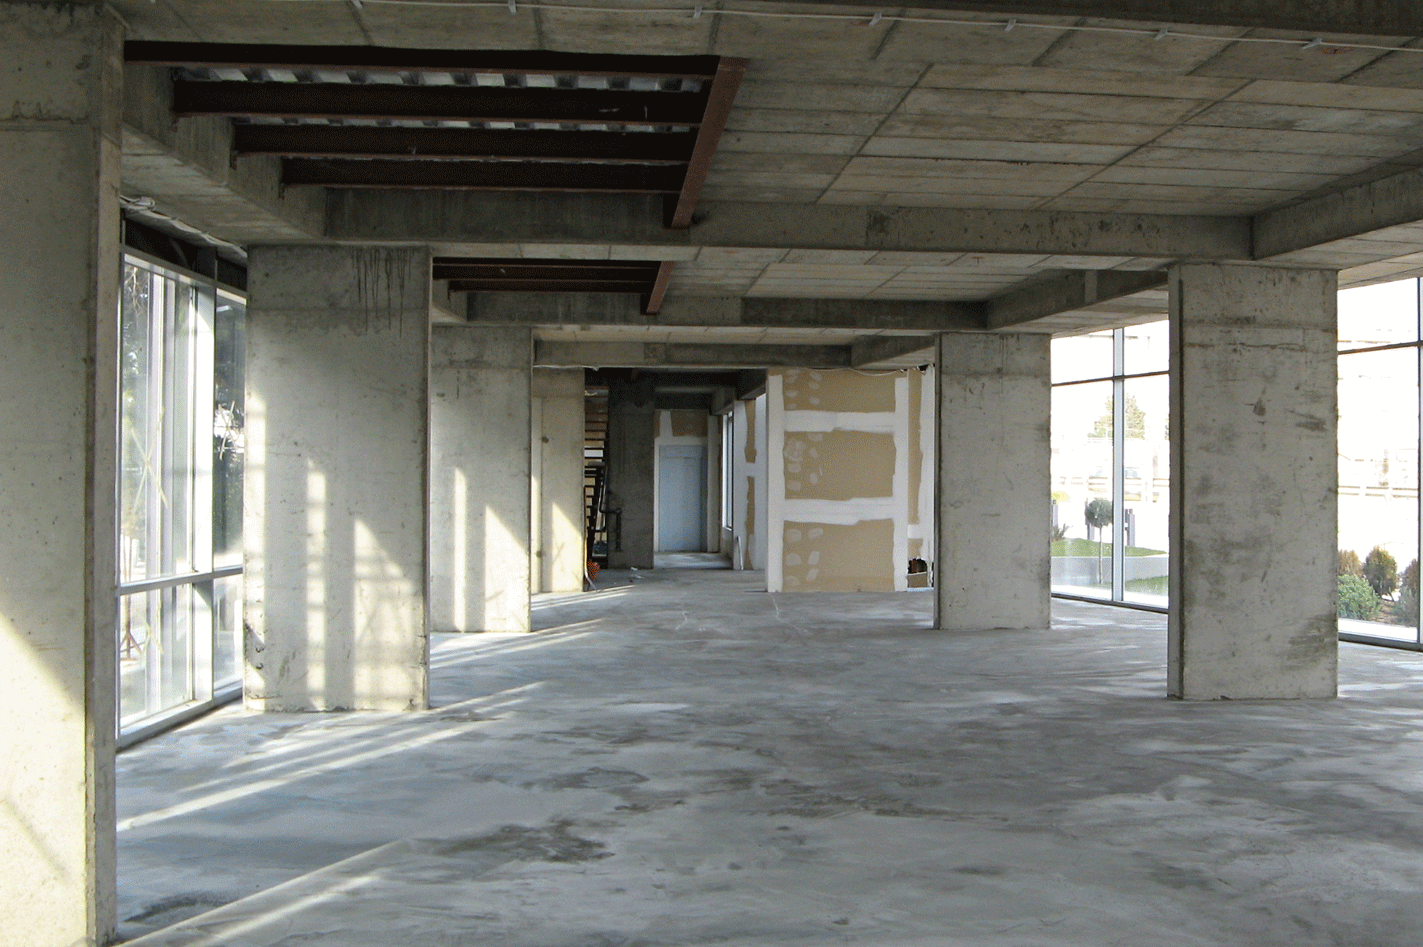 Construction stages showing the initial building shell and the elaborated finished interior space